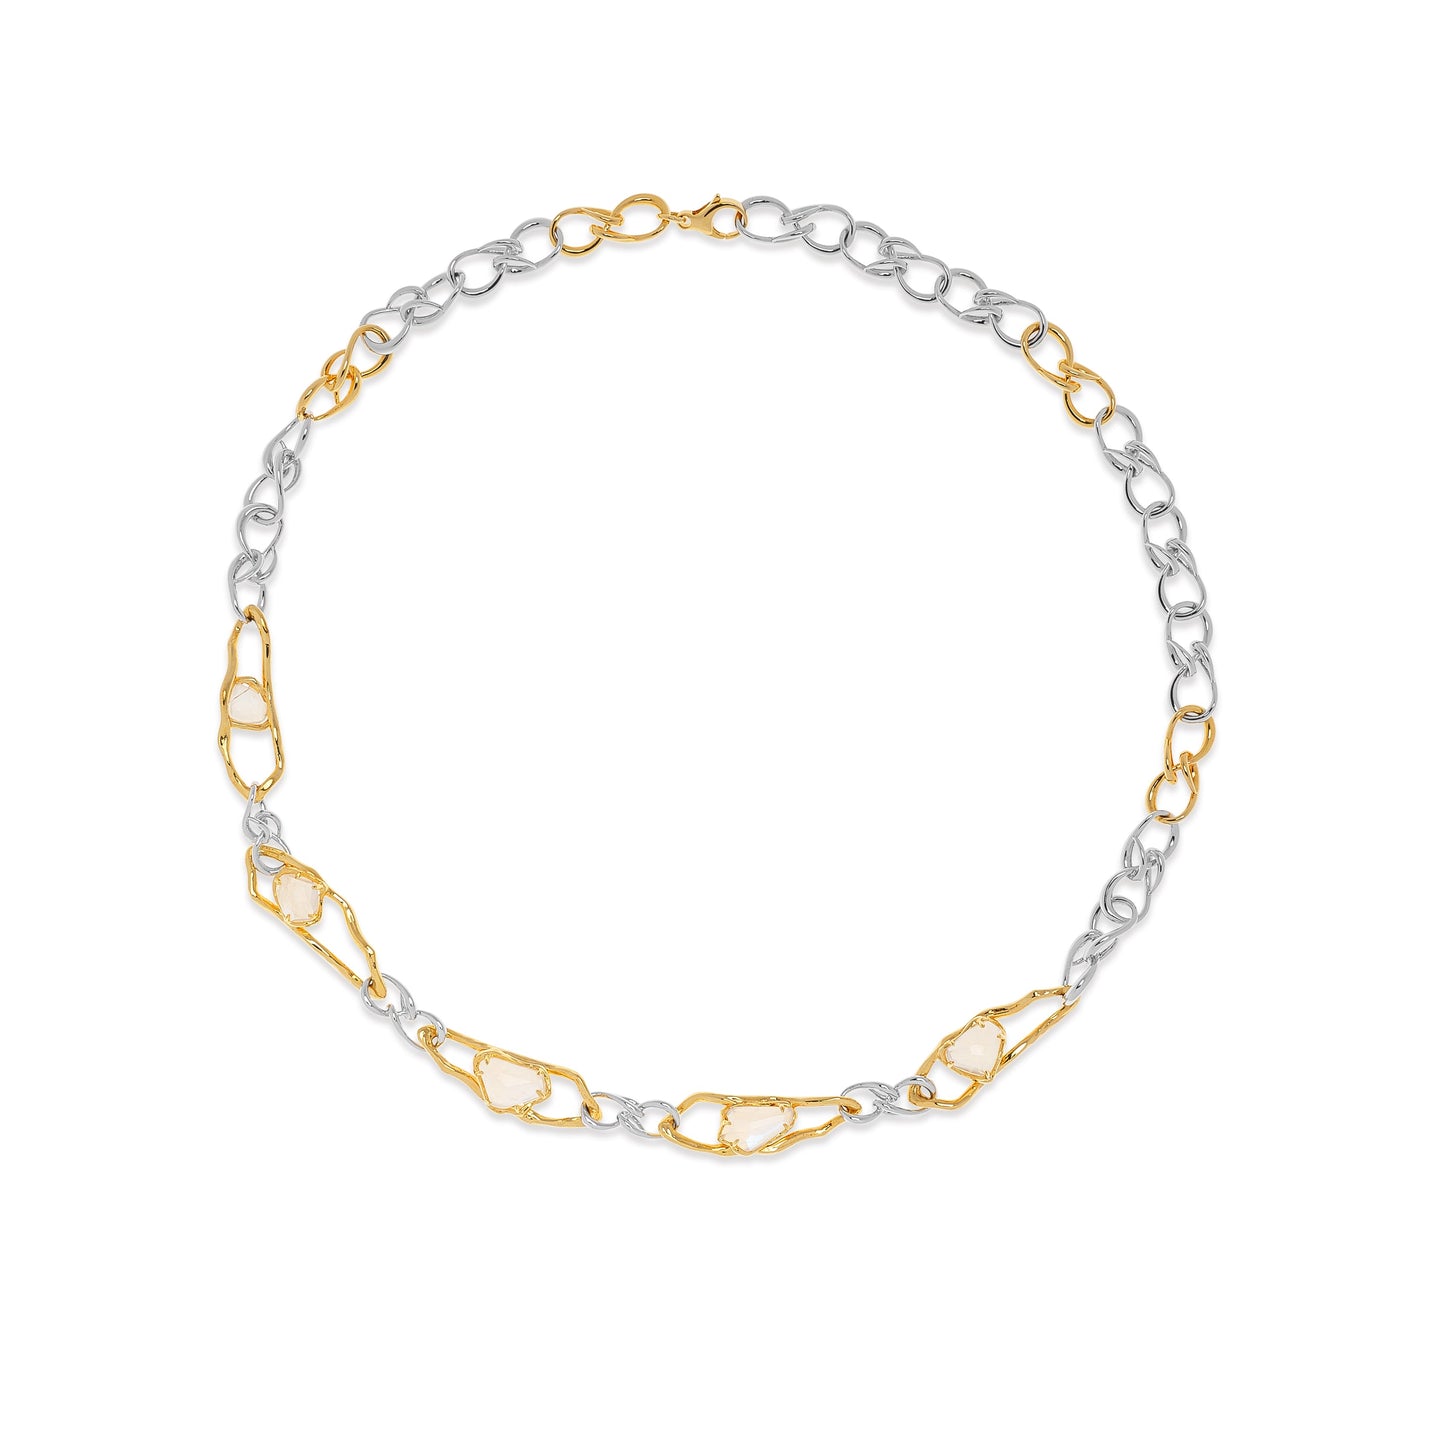 Collar Necklace in 9K Yellow & White Gold With Moonstones